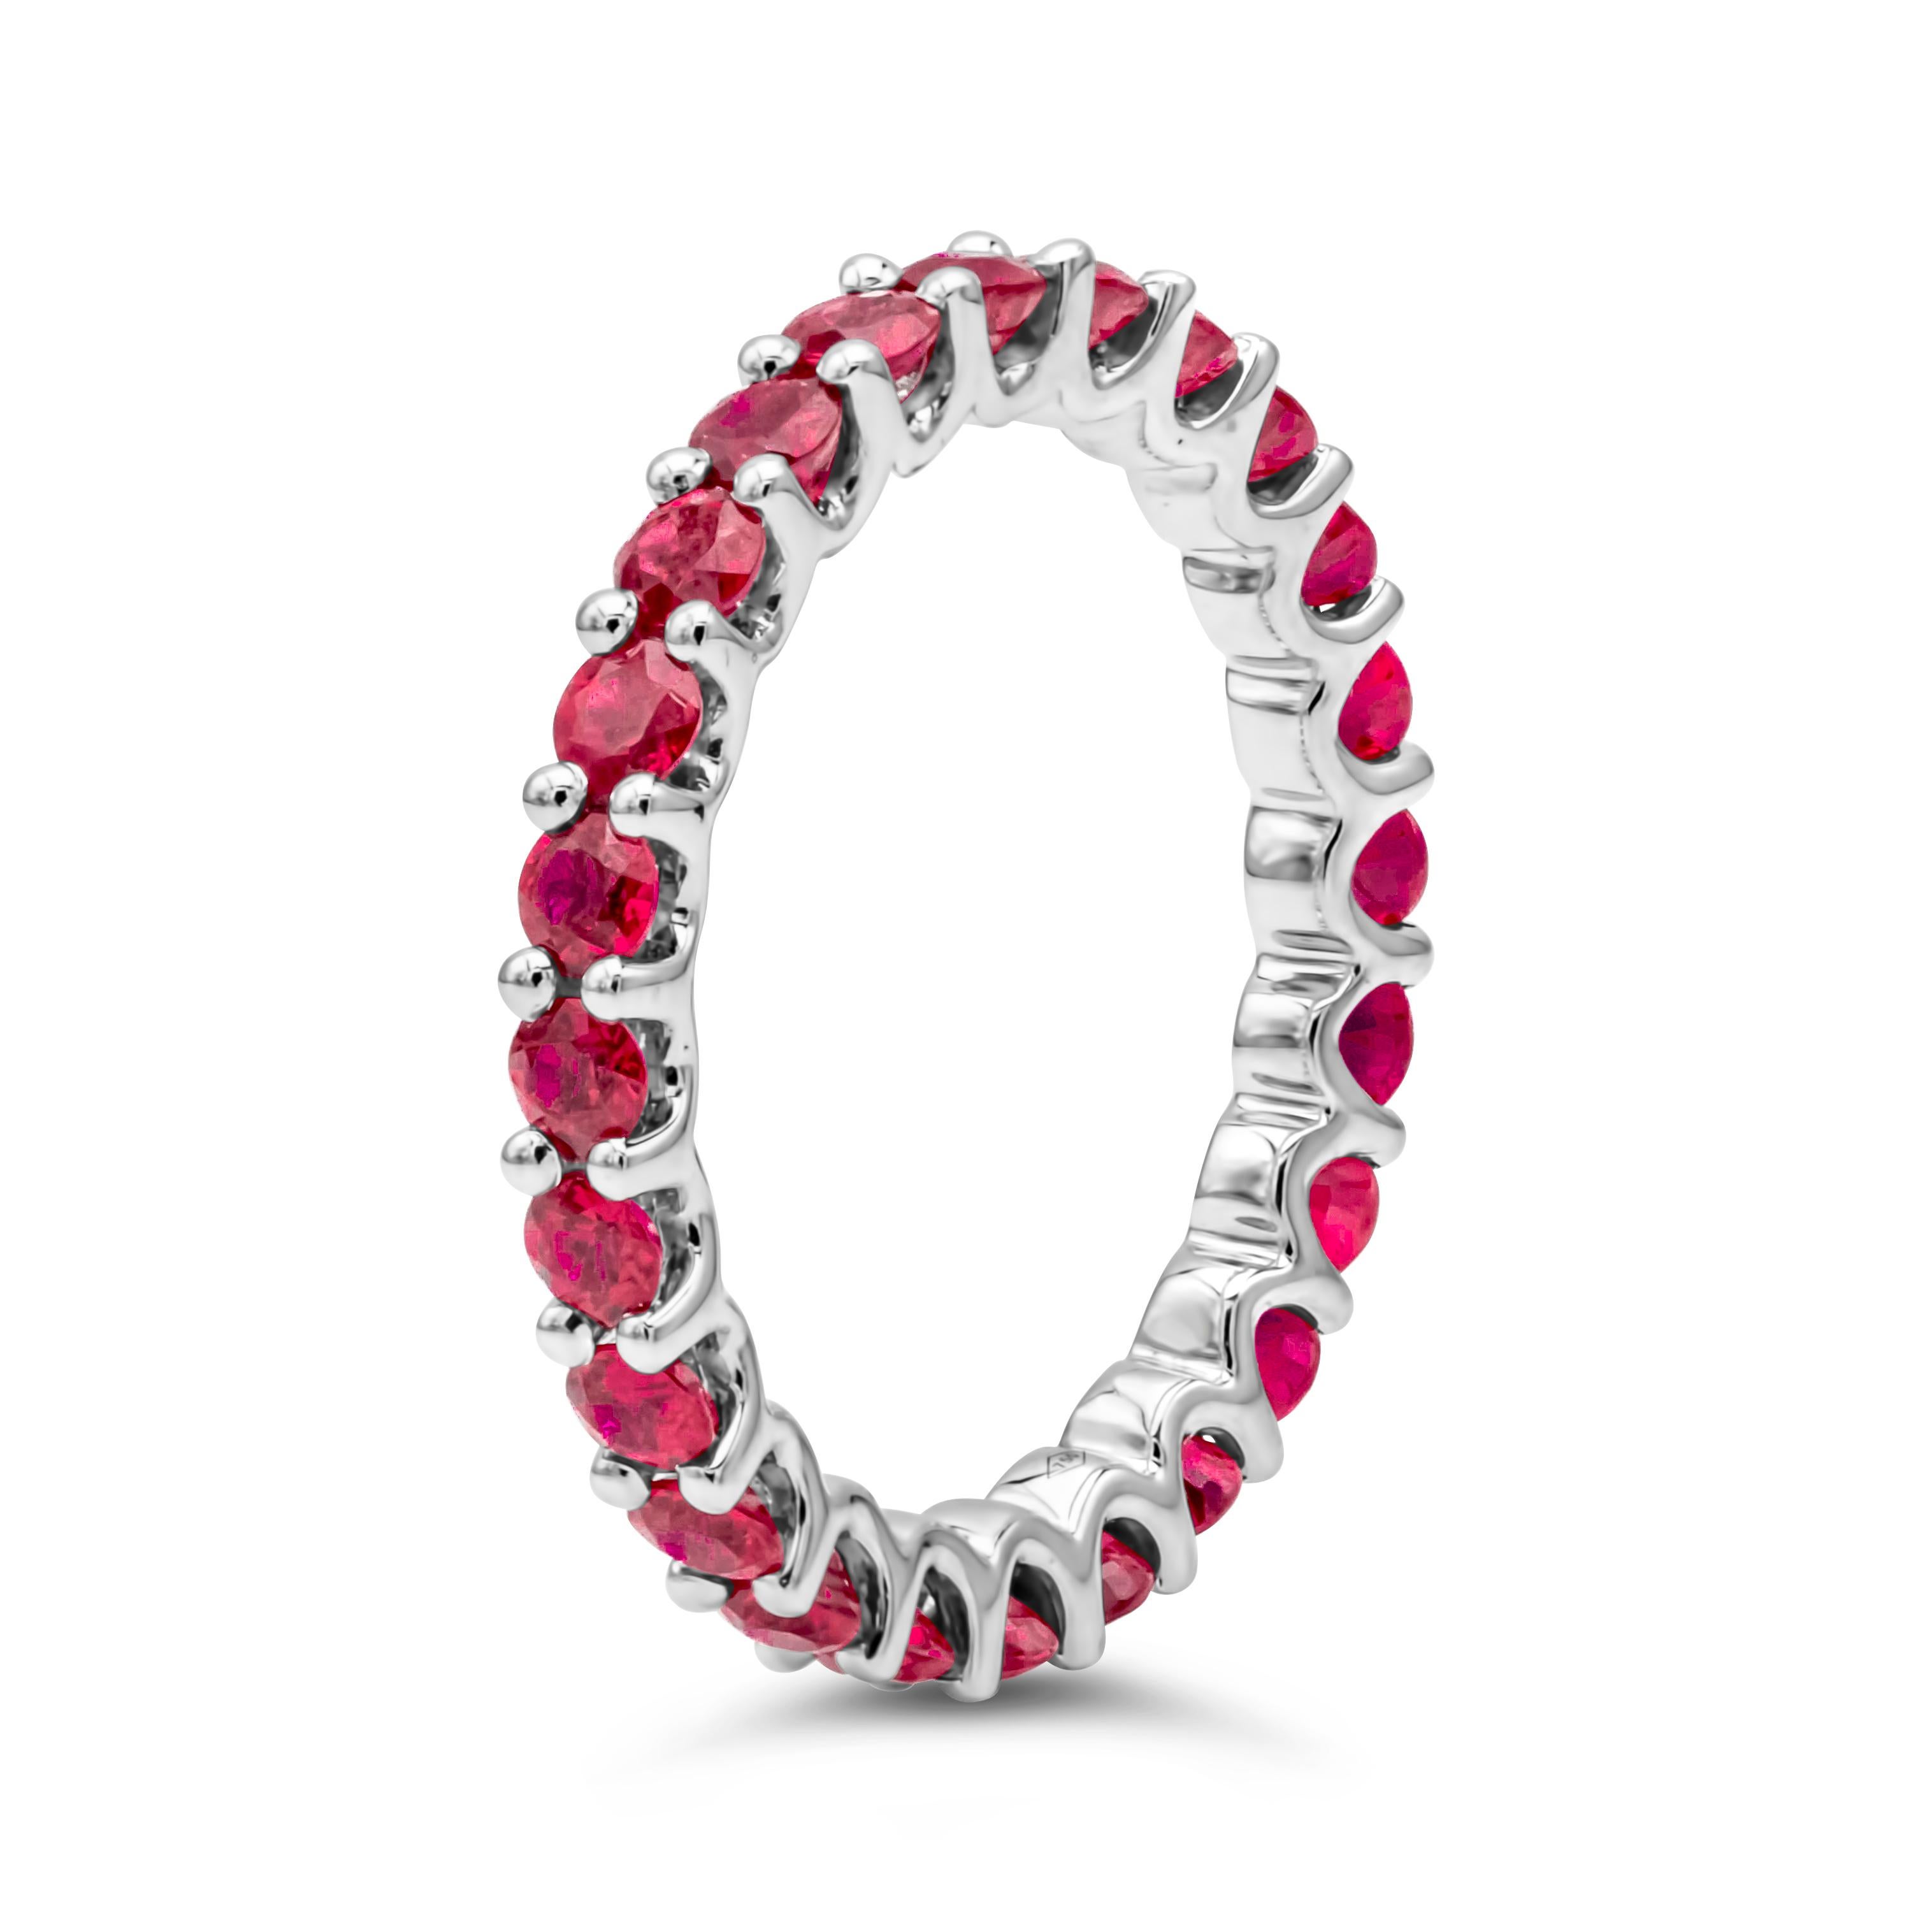 A unique take to the timeless eternity wedding band style showcases a 24 color-rich round cut rubies weighing 1.99 carats total, set in a classic shared prong setting. Finely made in 18K white gold. Size 6.5 US resizable upon request.

Style